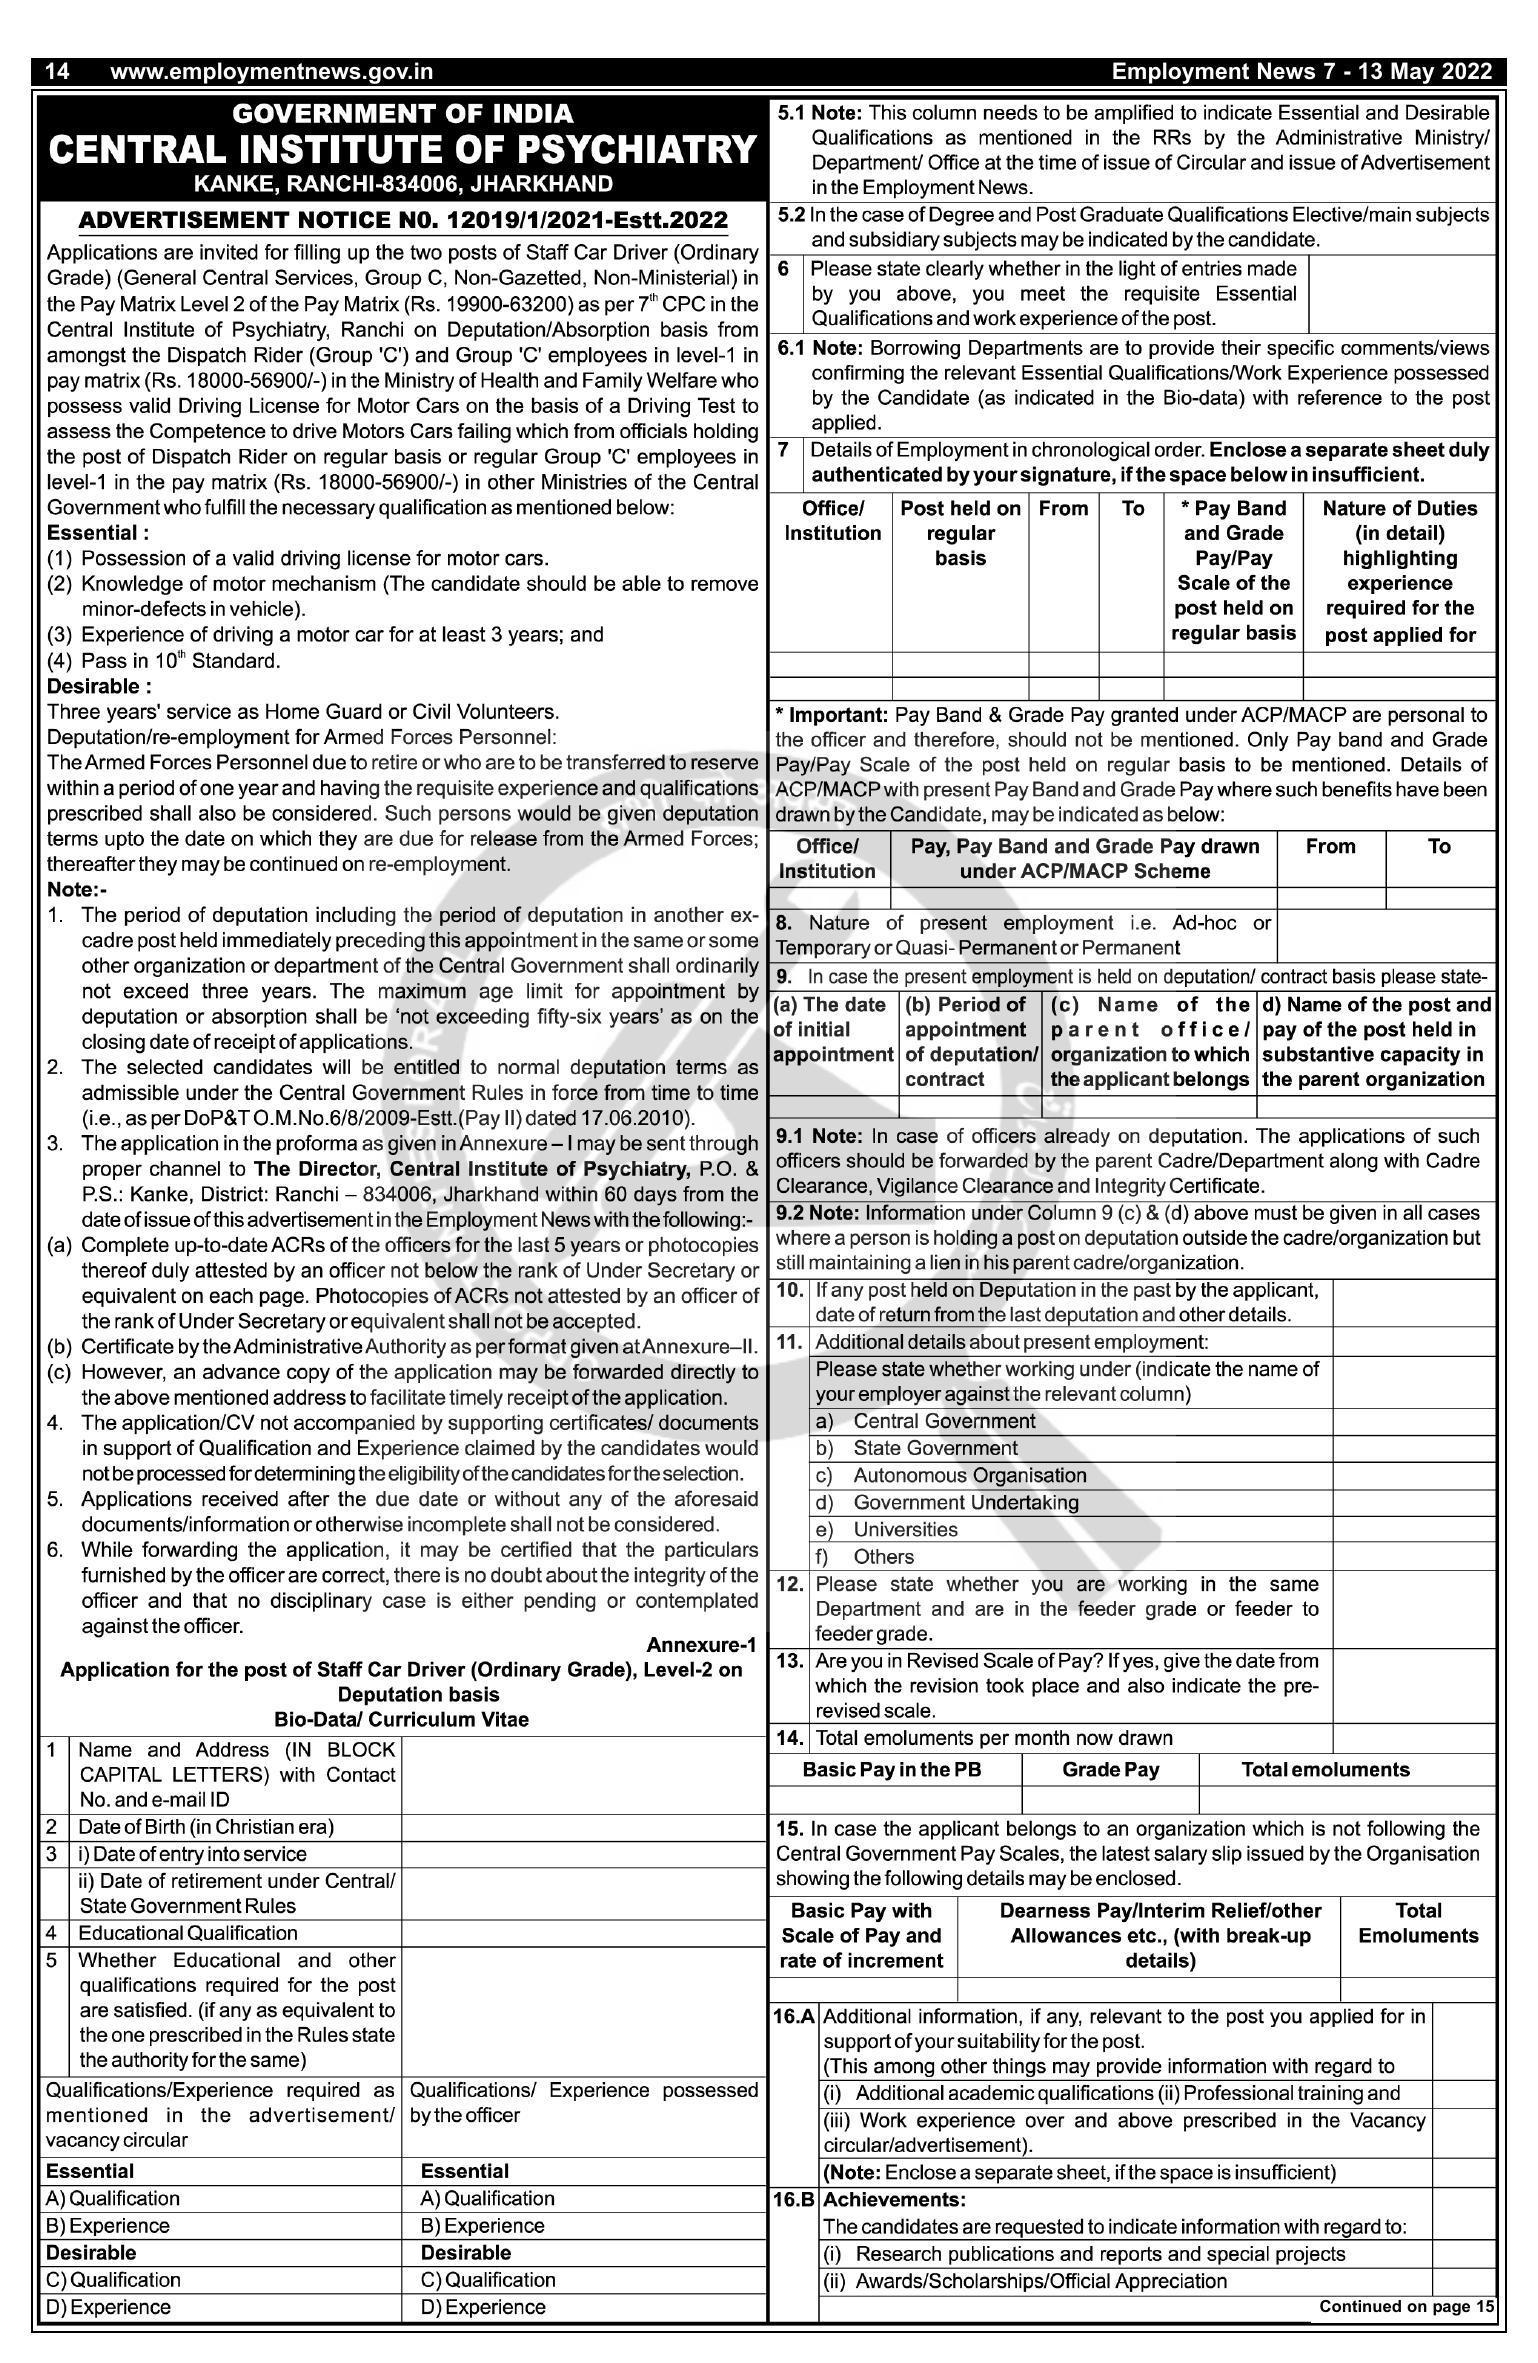 Central Institute of Psychiatry Recruitment 2022 For Staff Car Driver - Page 1